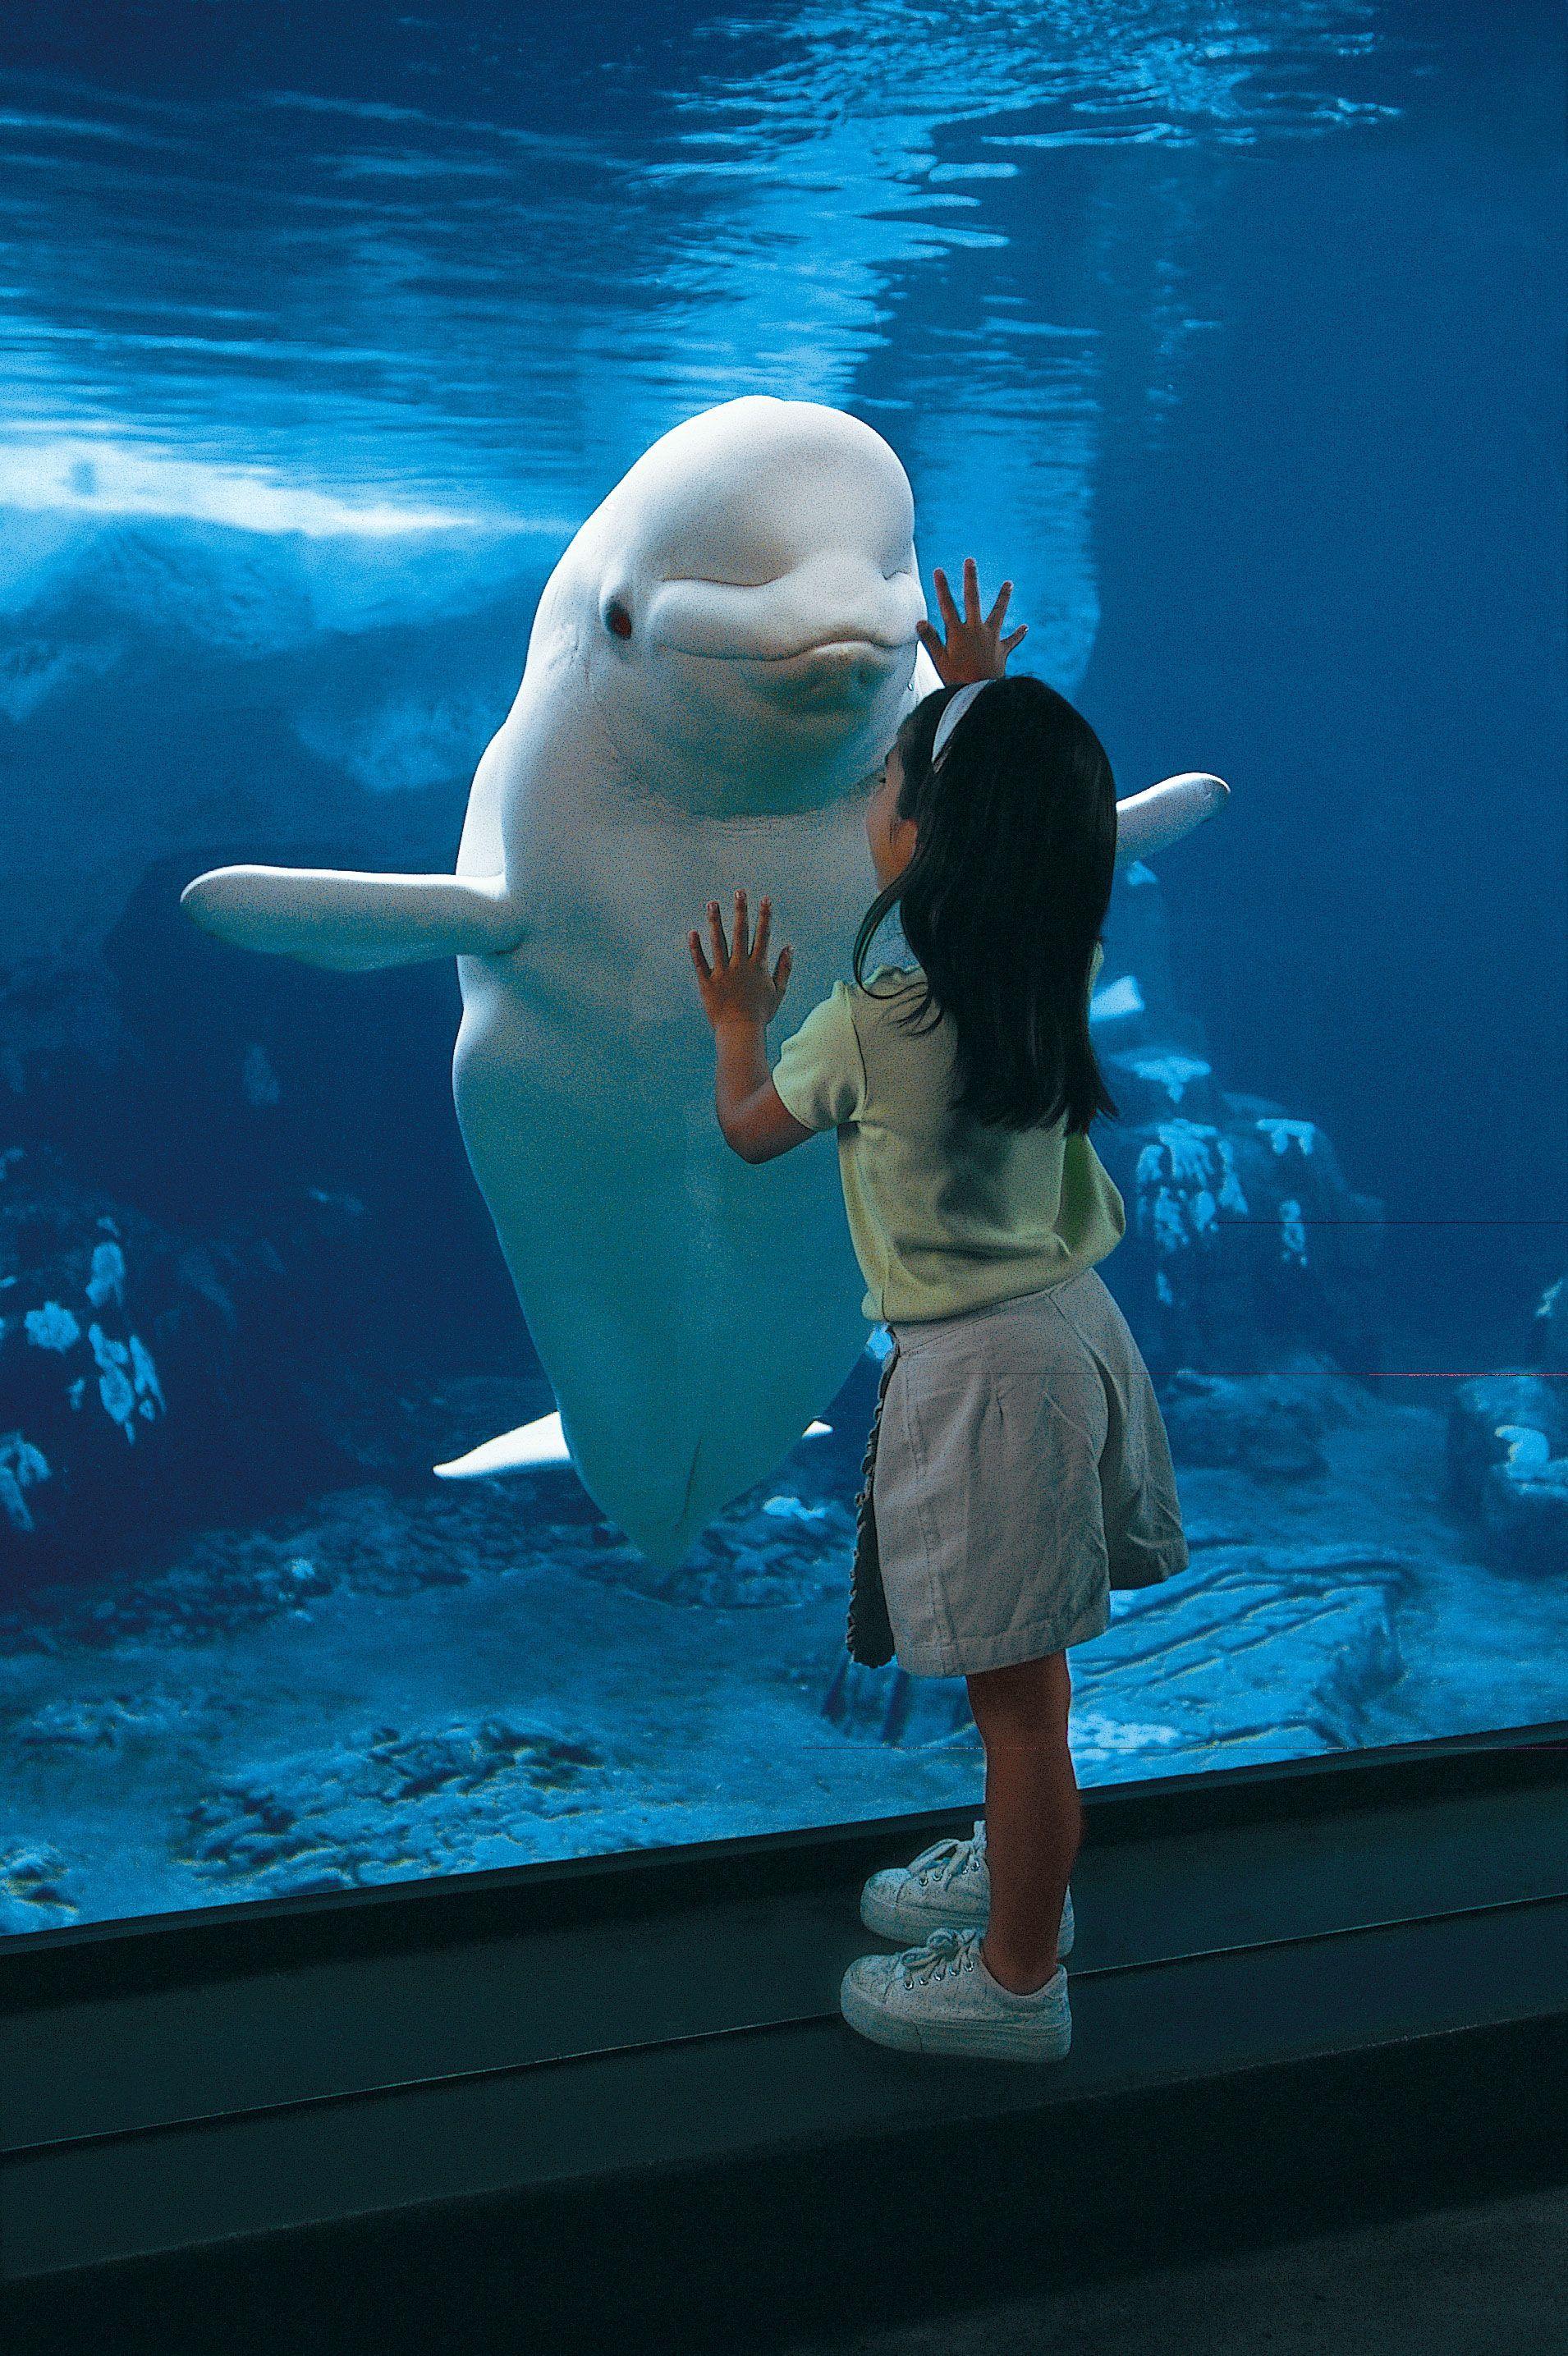 What A Cute Picture! Beluga Whales Can Grow 10 15 Feet Long